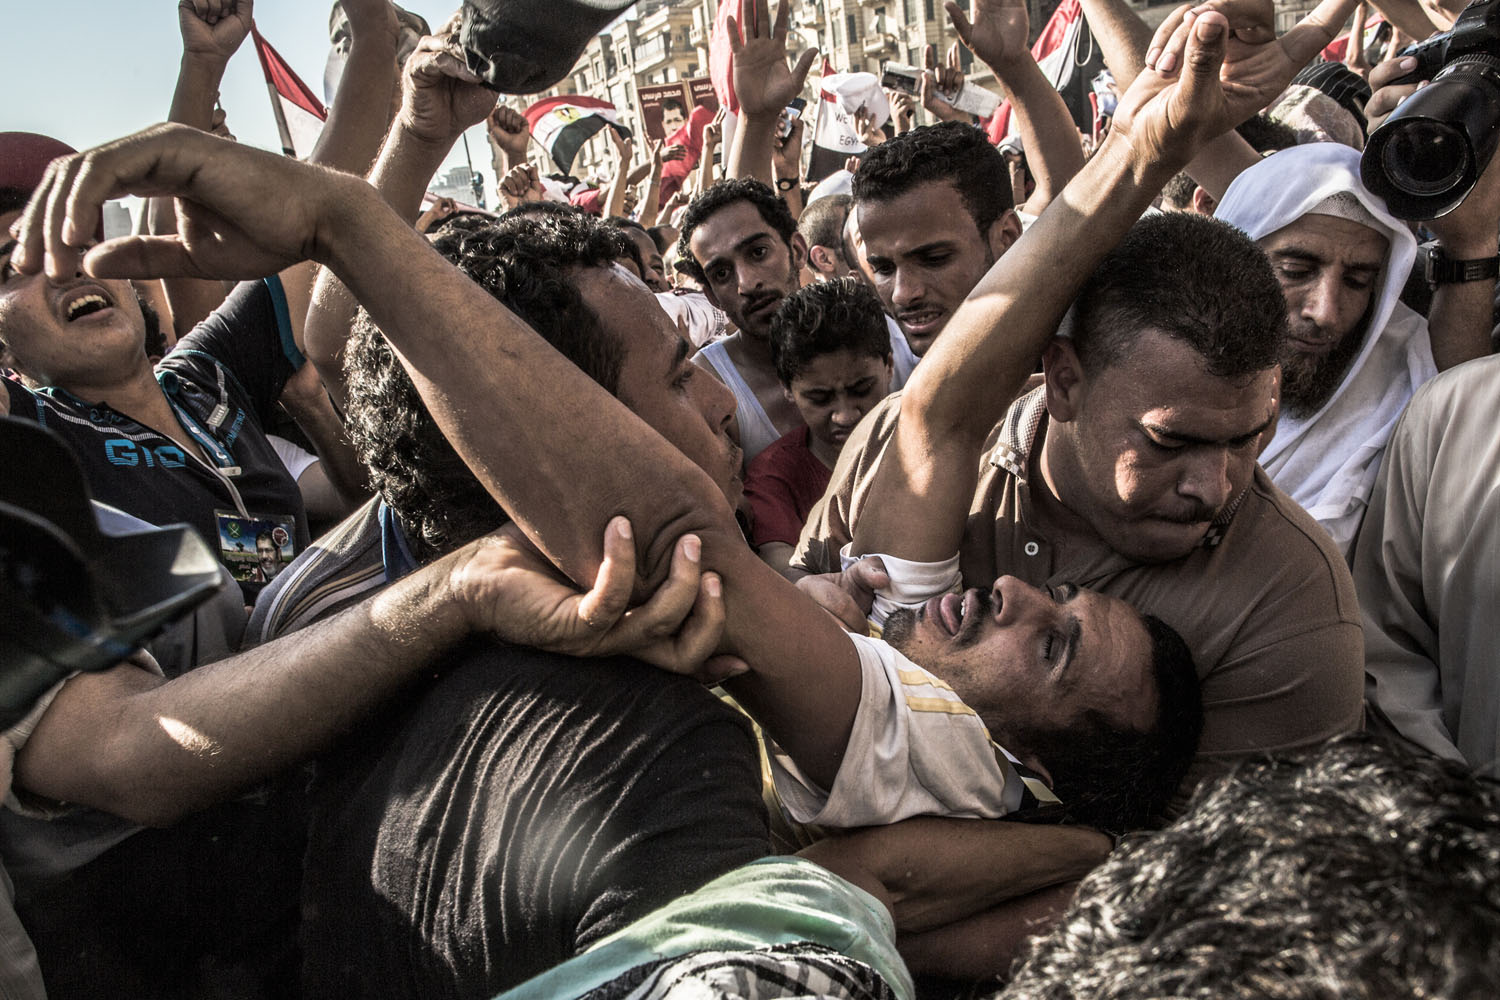 June 24, 2012, Cairo. A supporter of the Muslim Brotherhood is carried onto the stage as Egyptians celebrate.